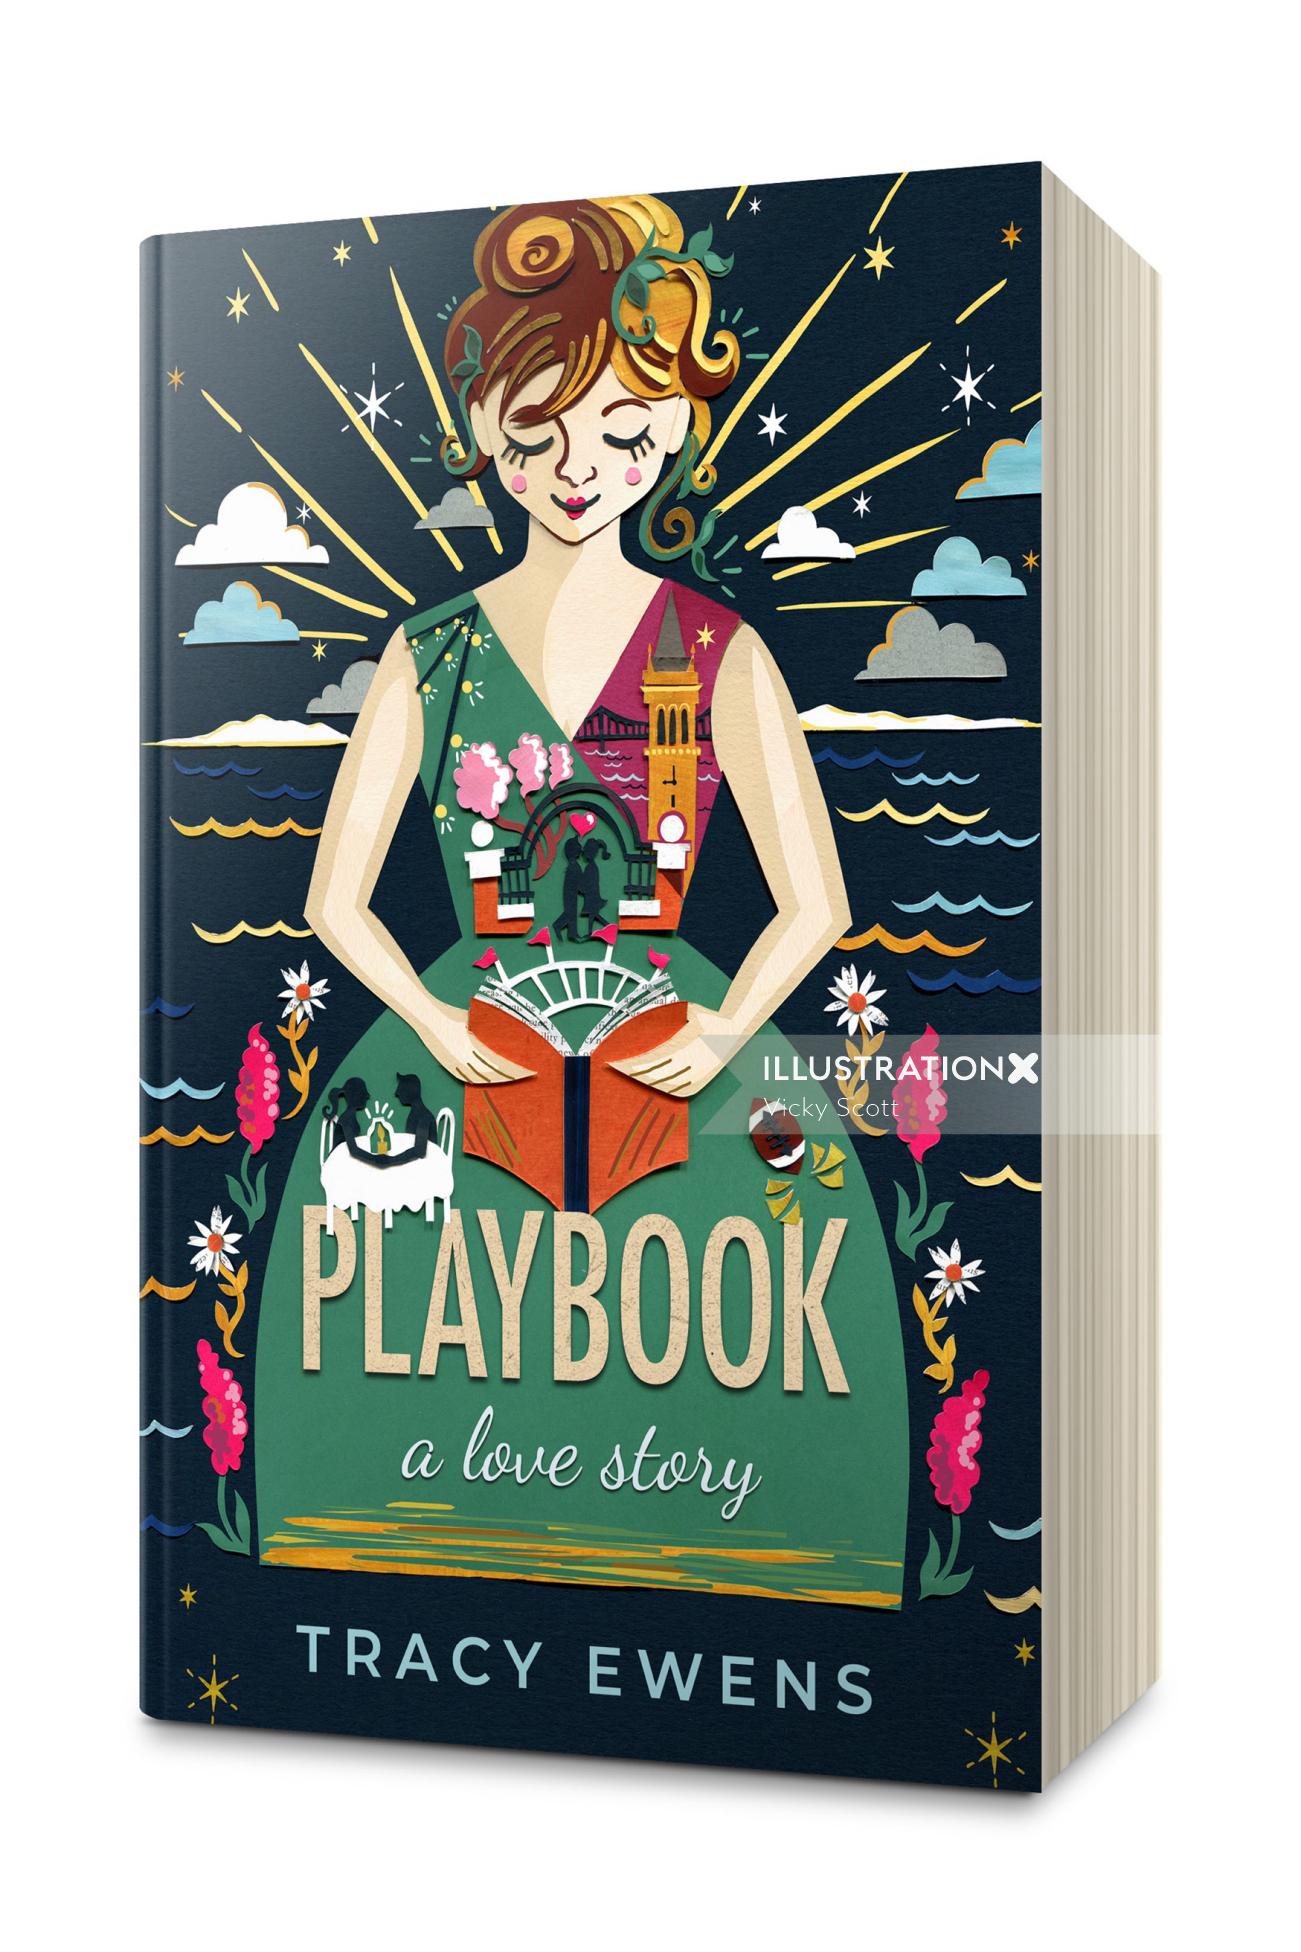 Playbook: A Love Story's novel's cover art